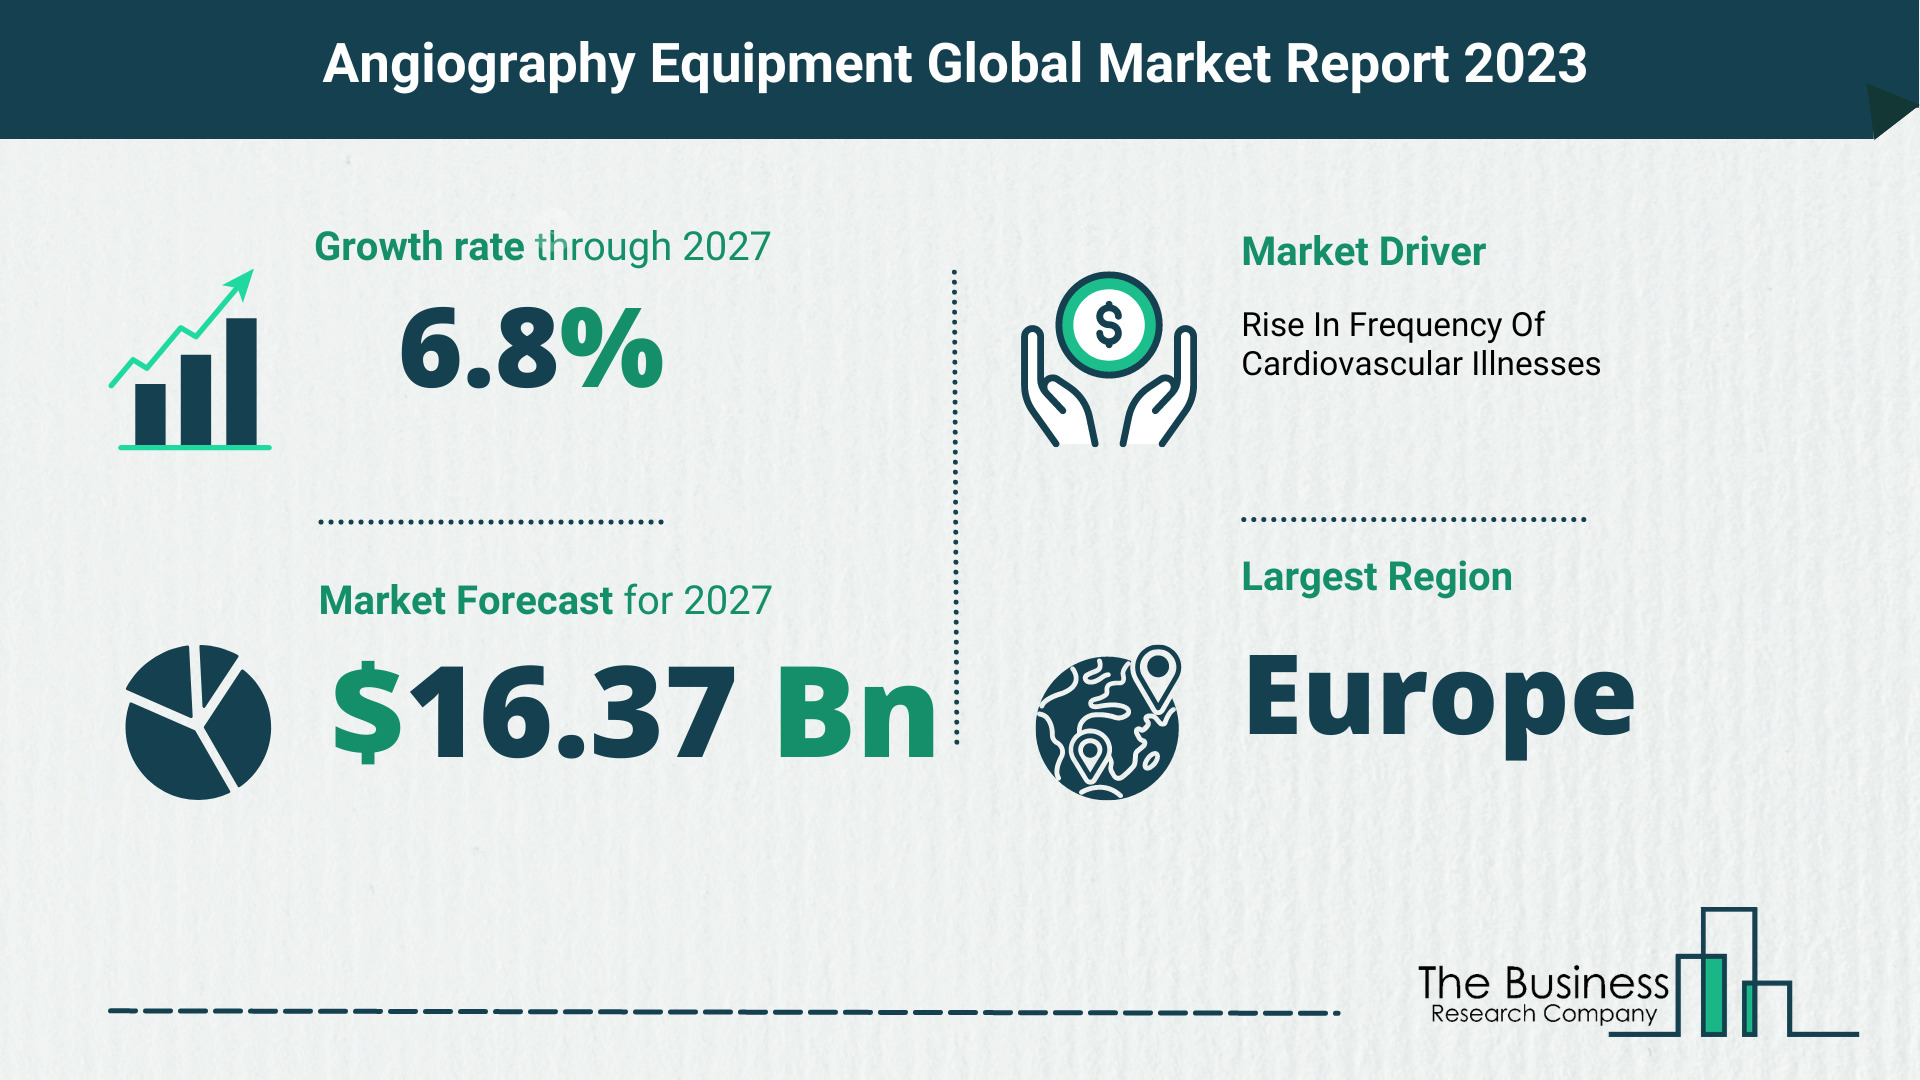 Global Angiography Equipment Market Opportunities And Strategies 2023